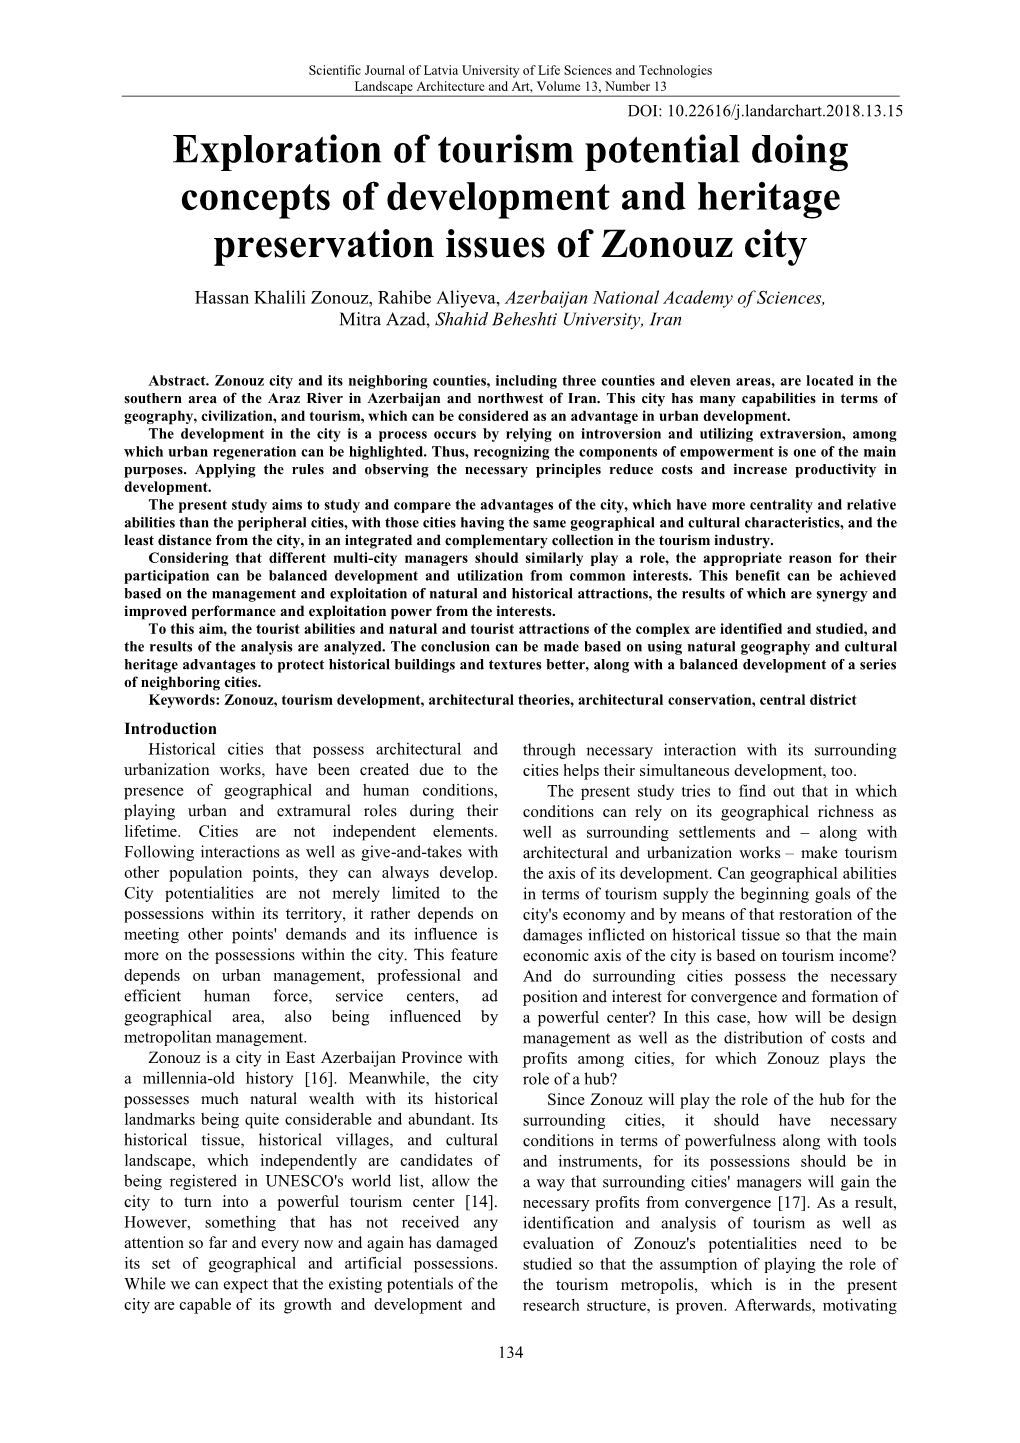 Exploration of Tourism Potential Doing Concepts of Development and Heritage Preservation Issues of Zonouz City